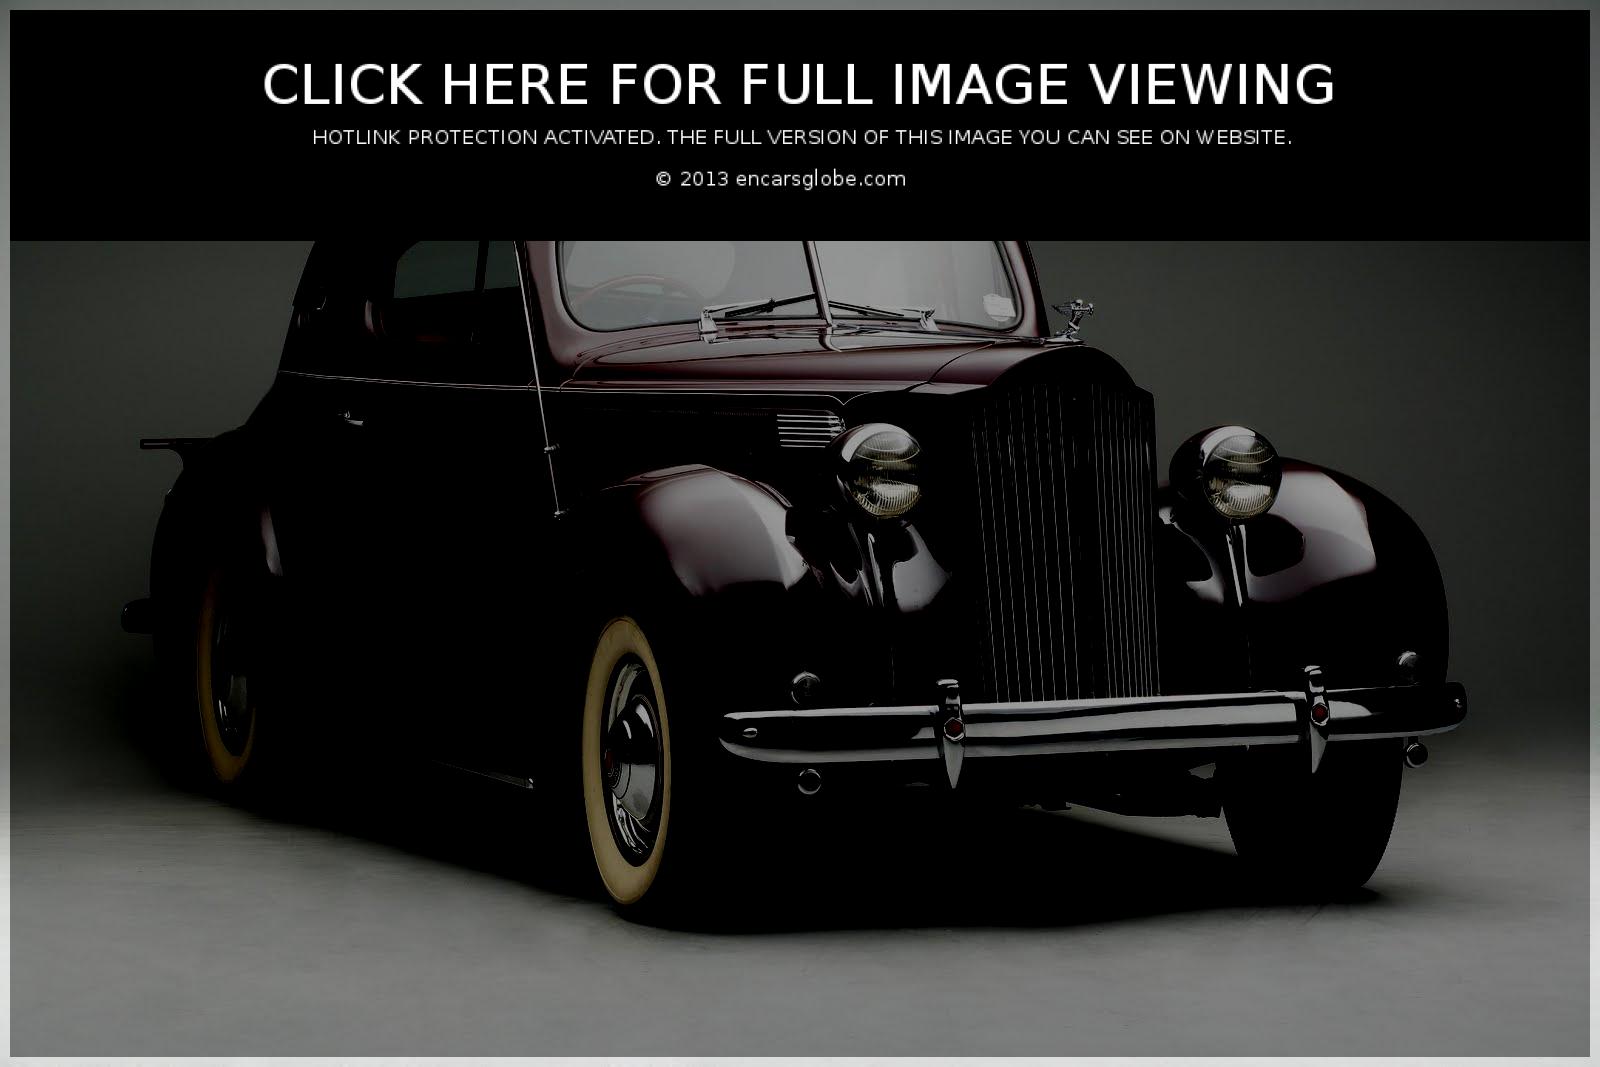 Packard Six club coupe: Photo gallery, complete information about ...